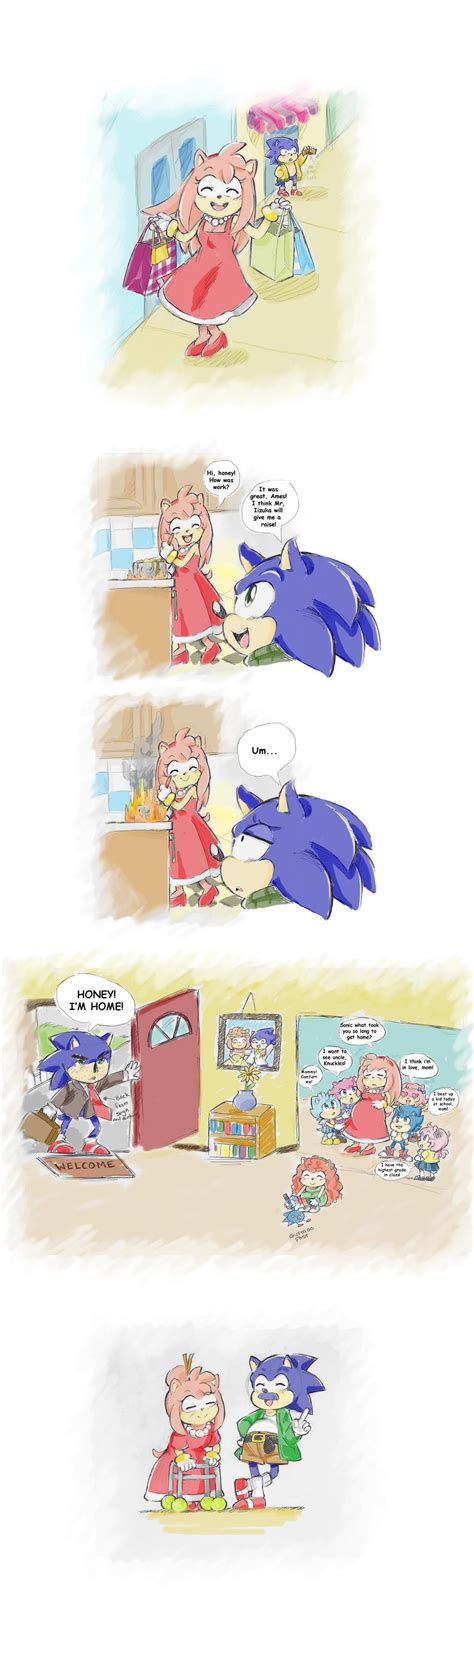 Sonic And Amy Marriage Future Doodles By Sonicxamy09 On Deviantart